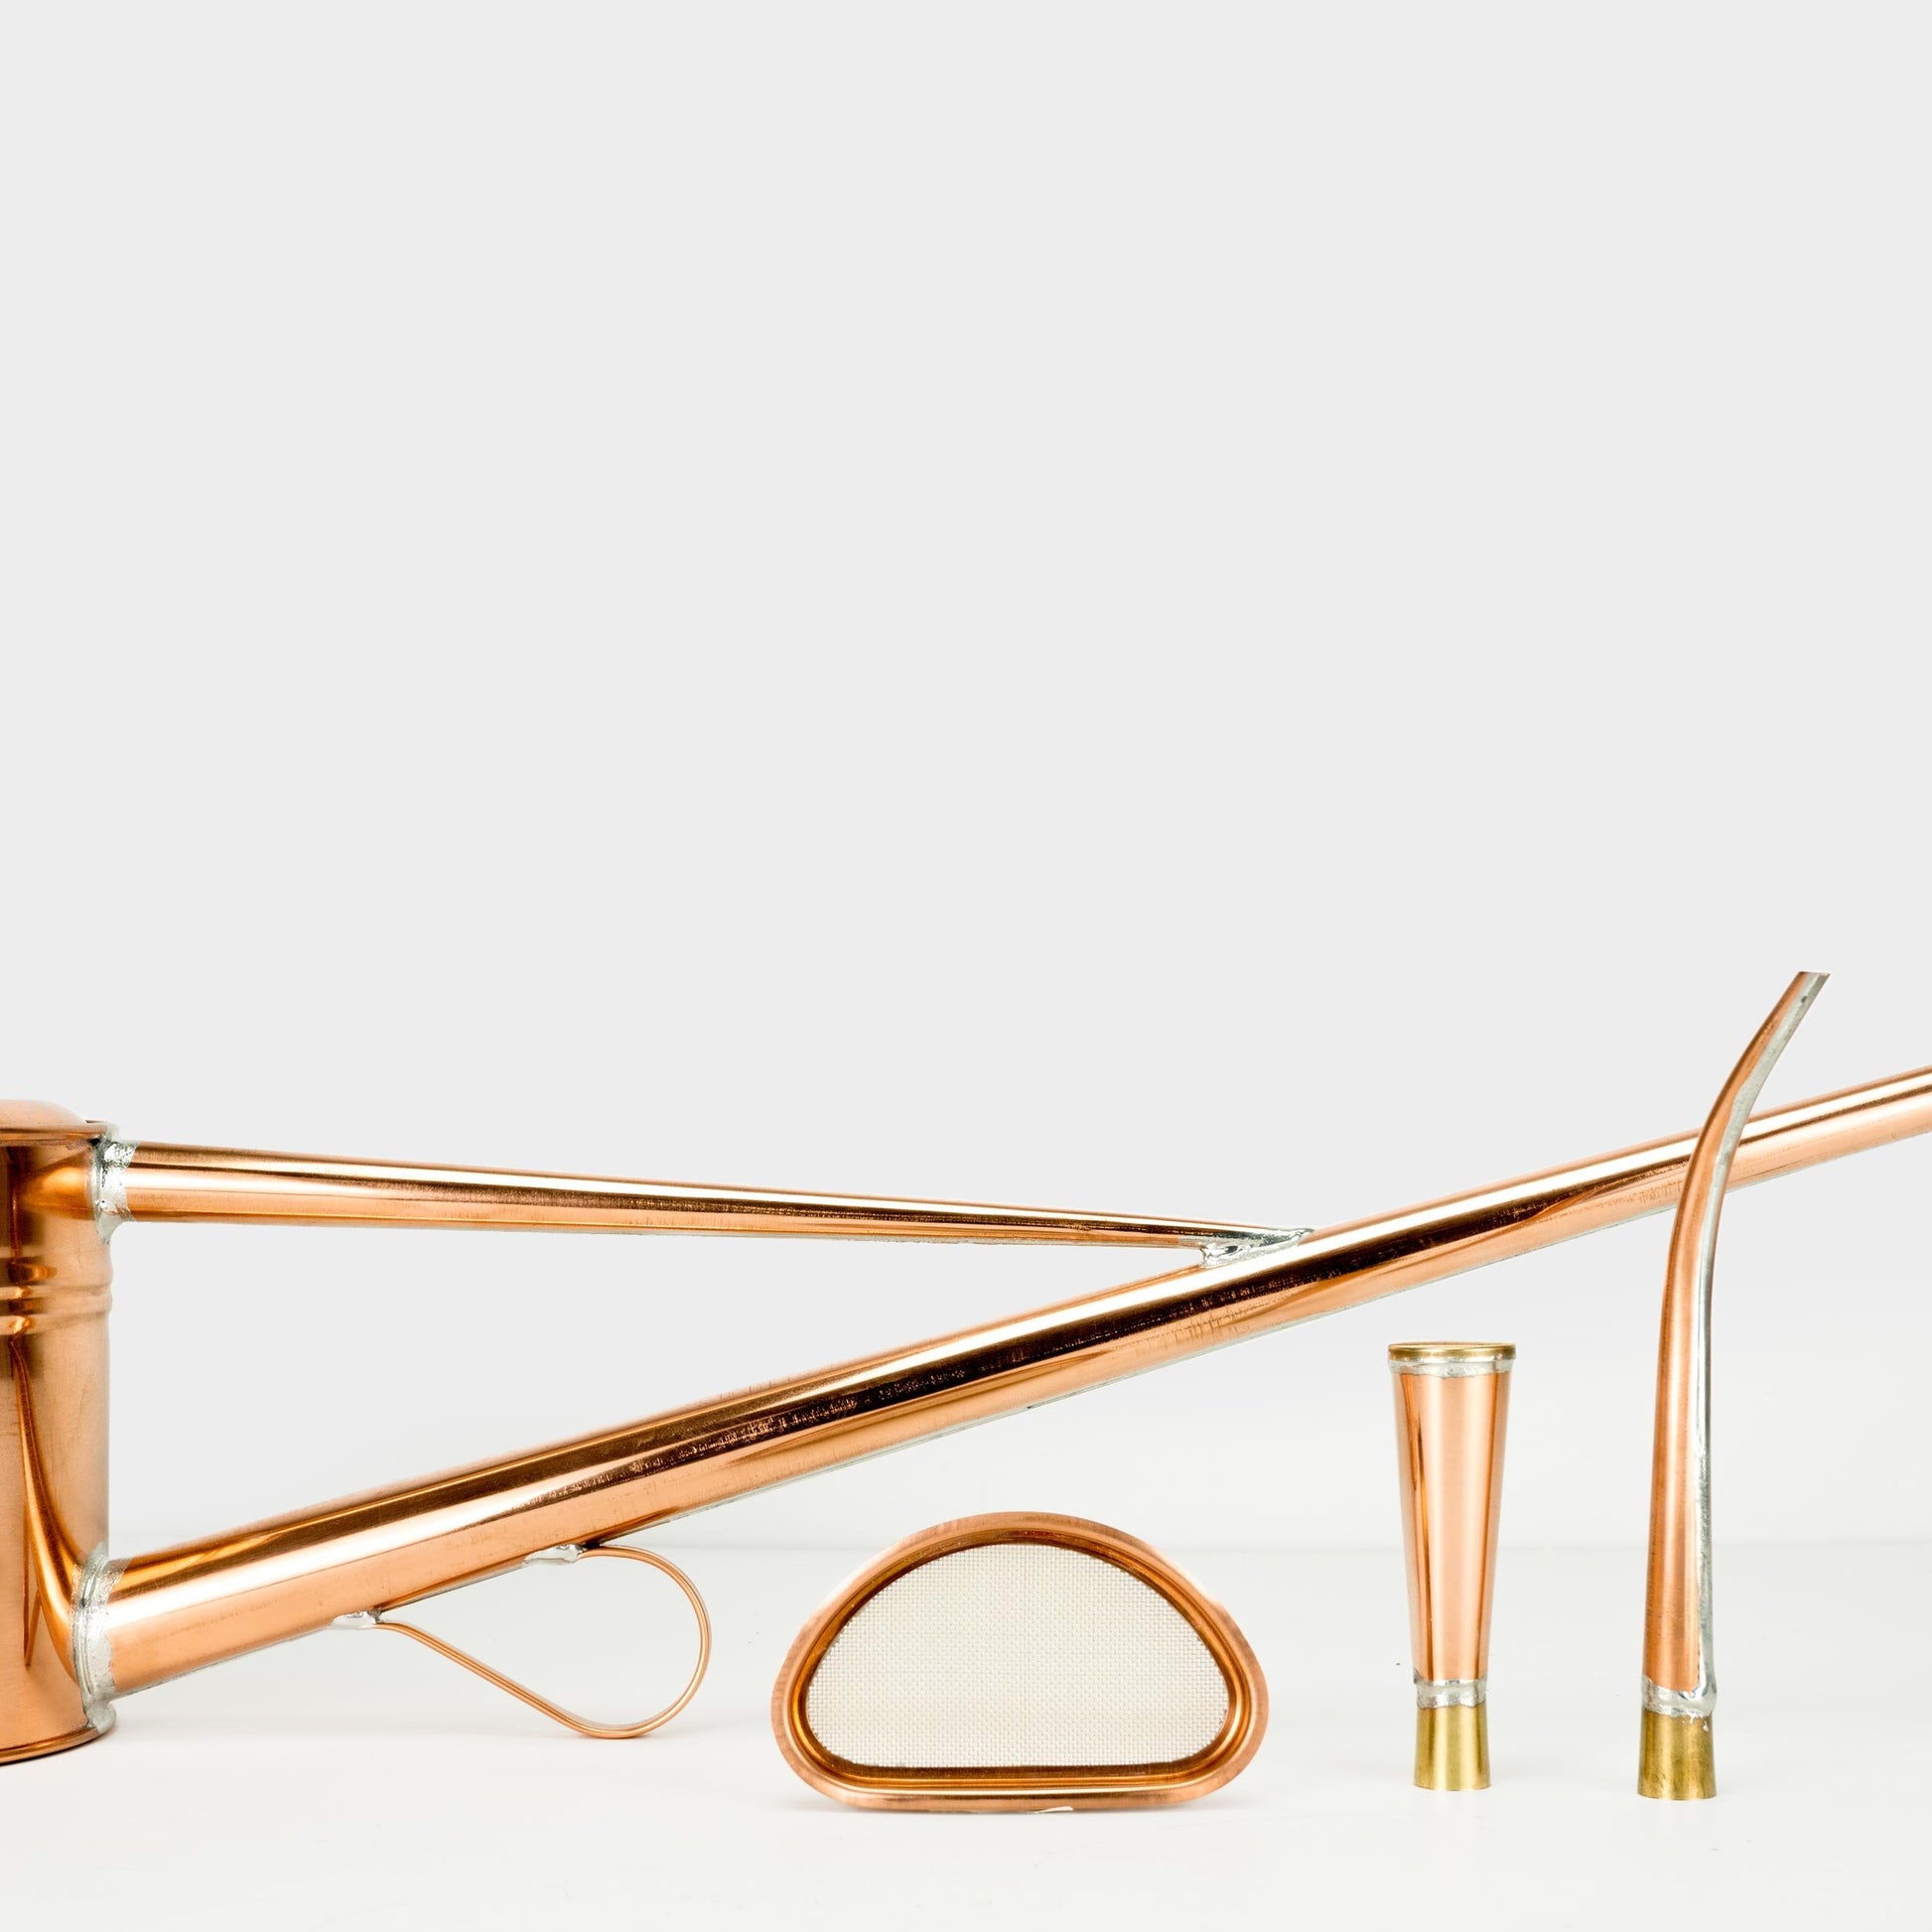 (Waitlist) LONG-NECKED COPPER WATERING CAN NO. 2 BY NEGISHI INDUSTRY CO.